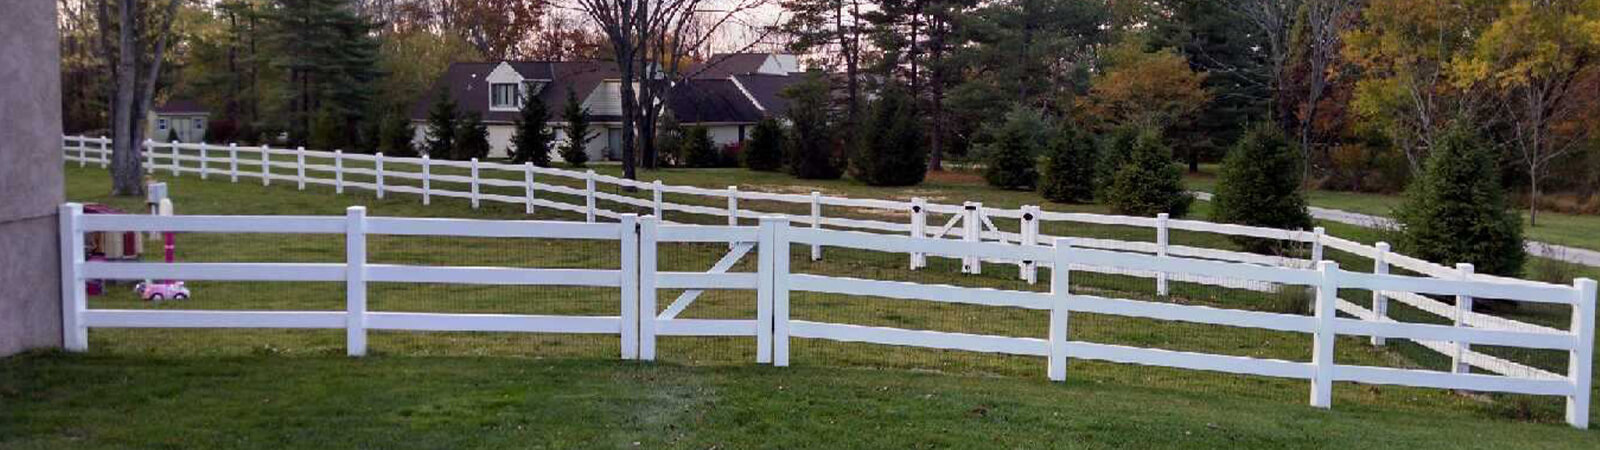 Vinyl Split rail fence and installation services from Montco Fence